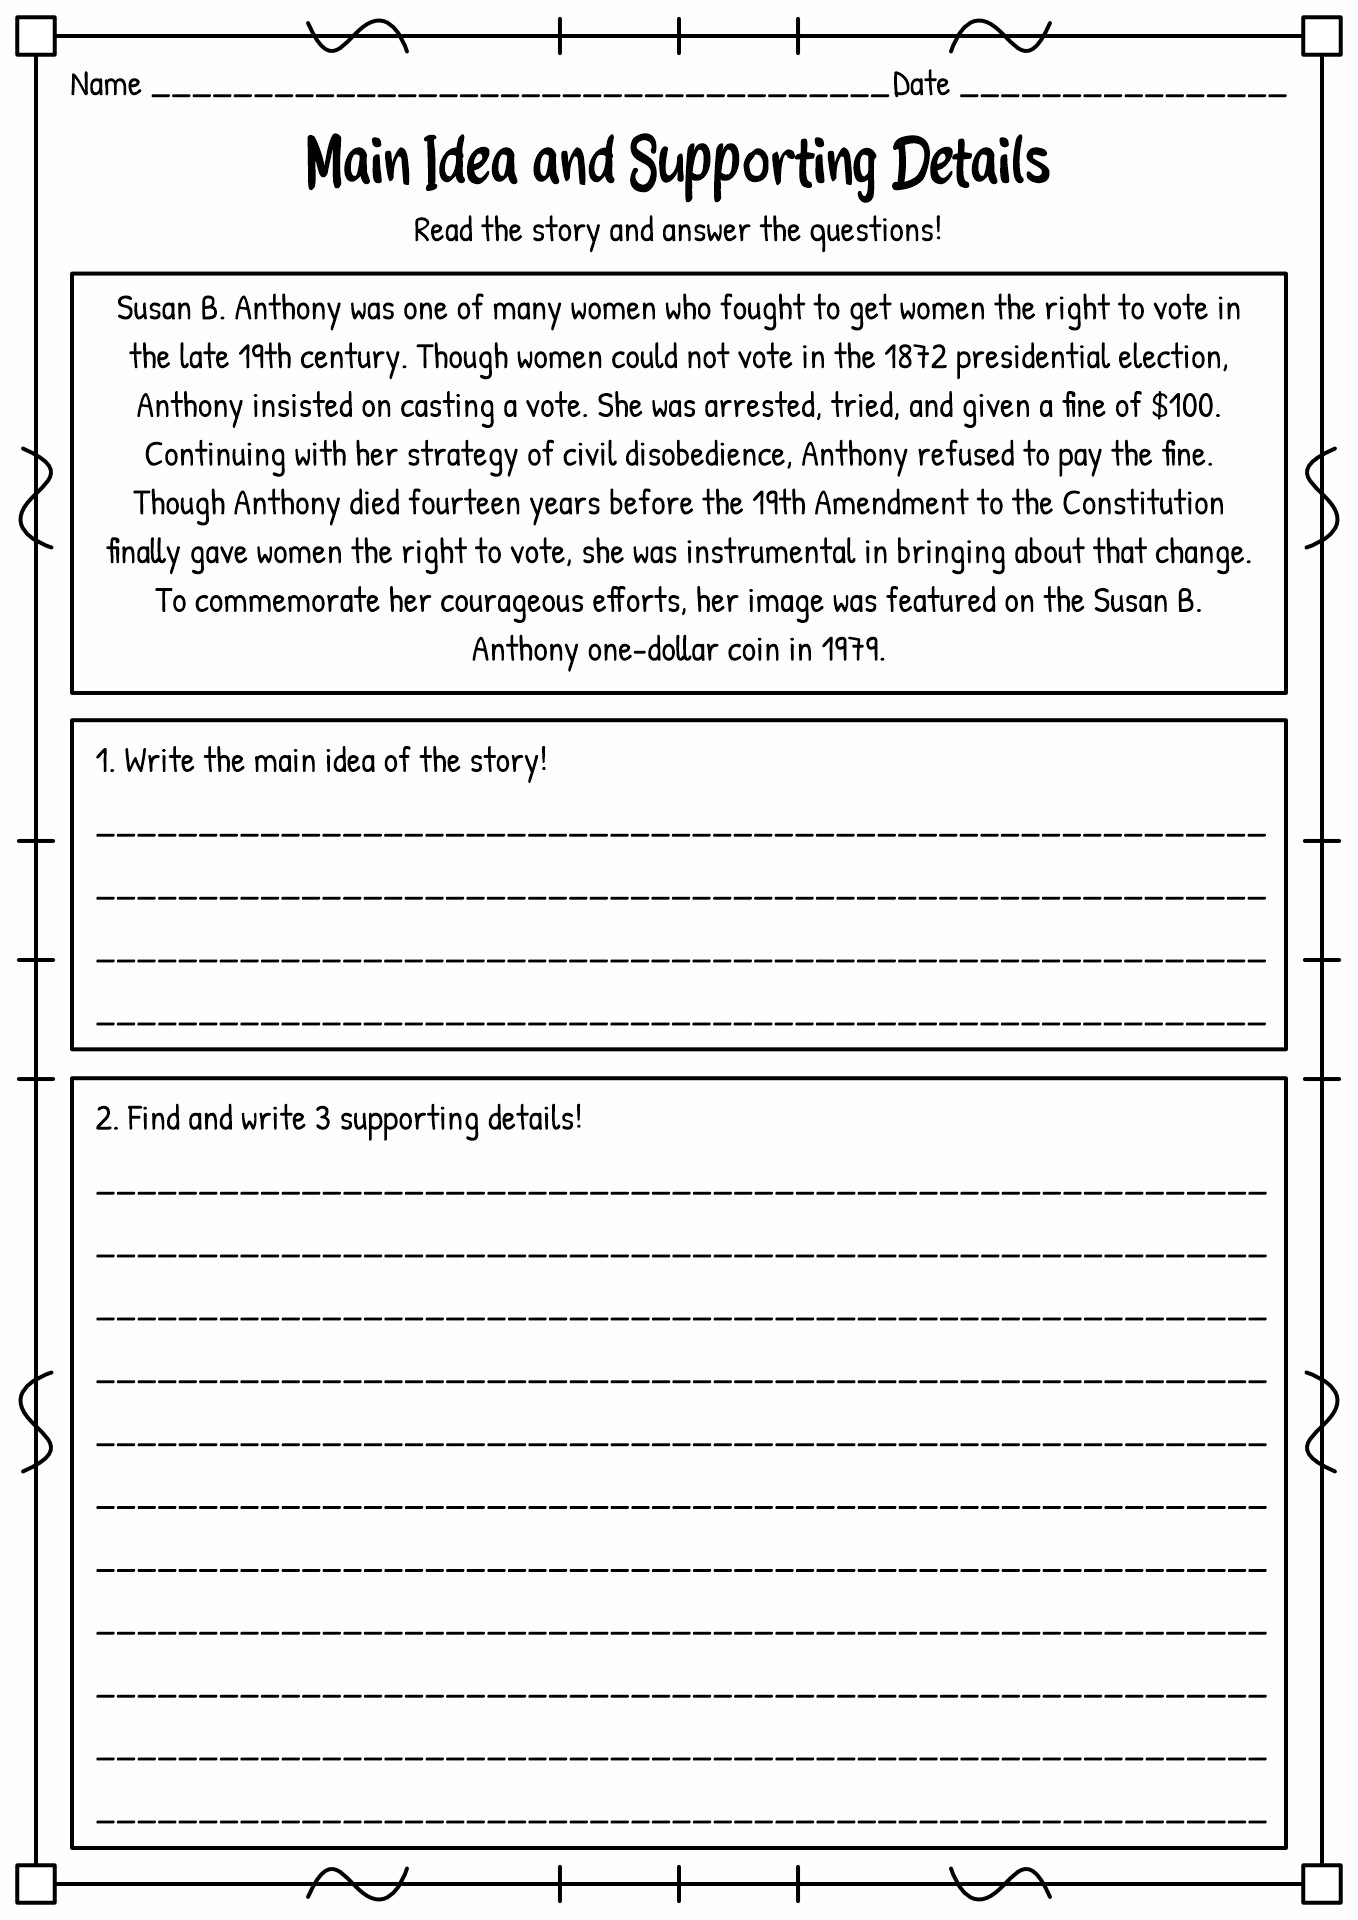 Main Idea and Details Worksheets